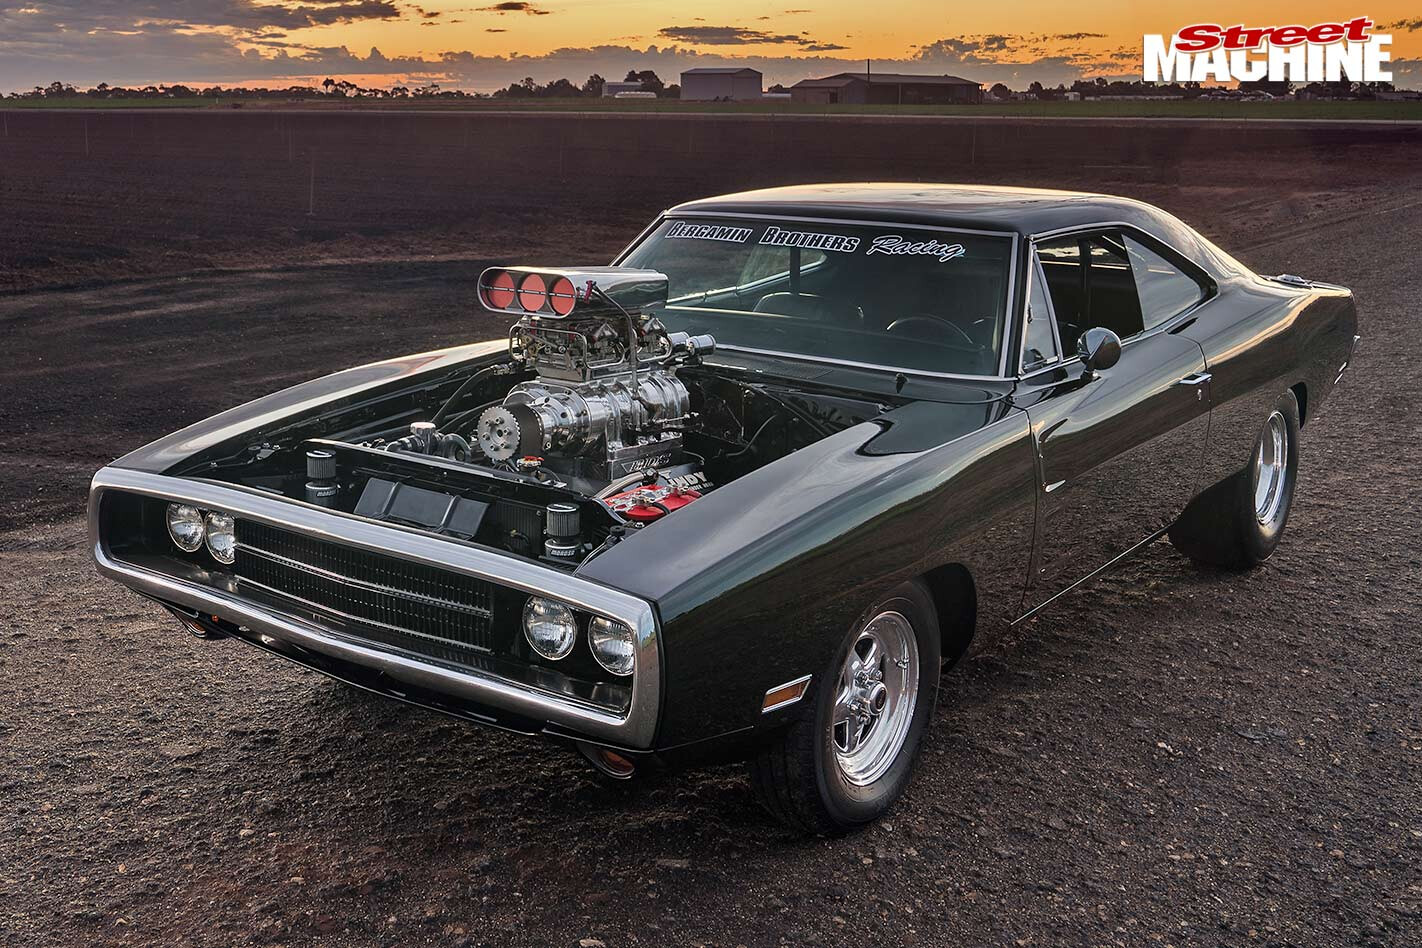 1969 Dodge Charger Rt With Blower.